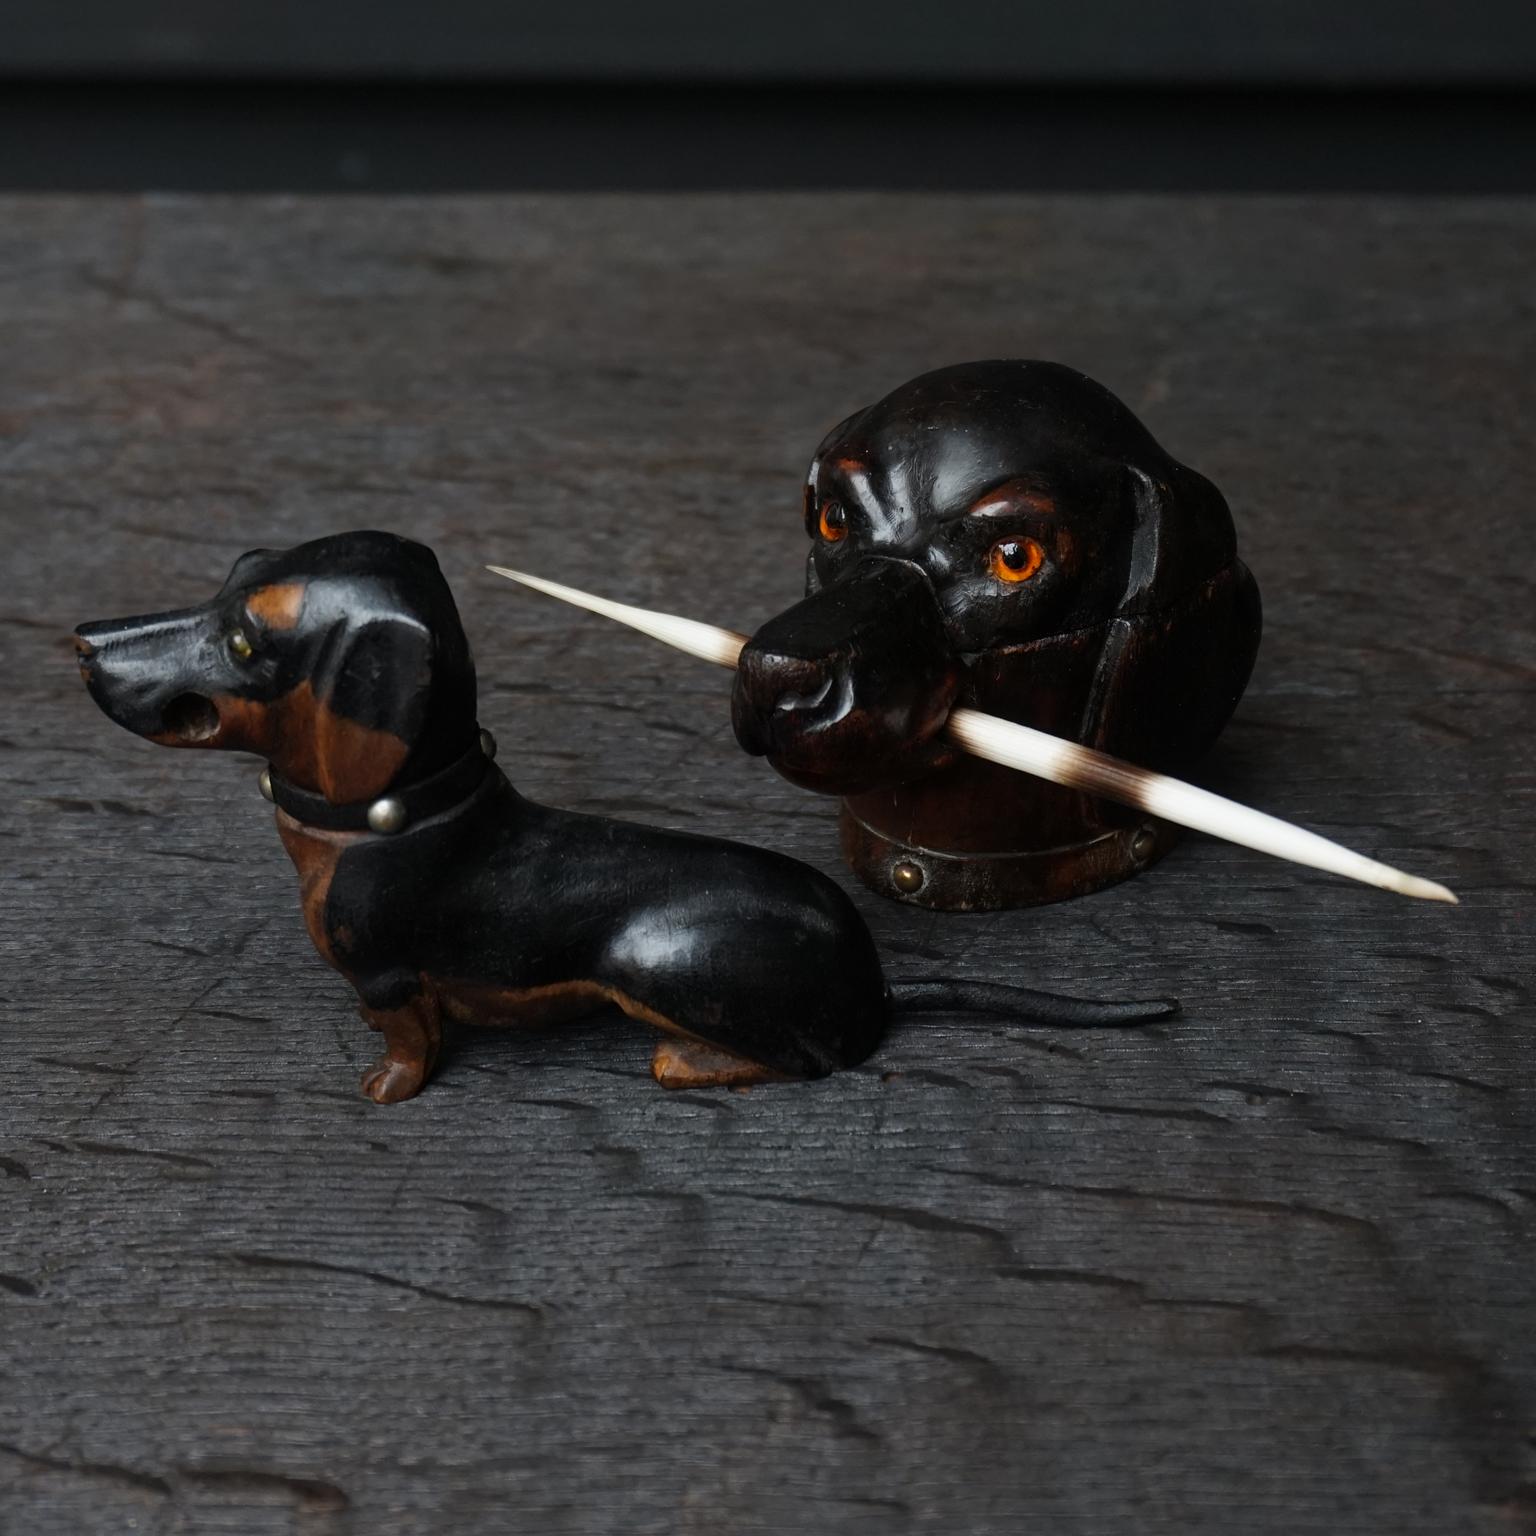 Set of two very cute original 19th century carved wooden Victorian era wiener dogs or dachshund inkwells.

The bigger one, which is a dachshund head, has a hinged lid that opens to reveal the little glass inkwell inside.
He has a nice carved collar